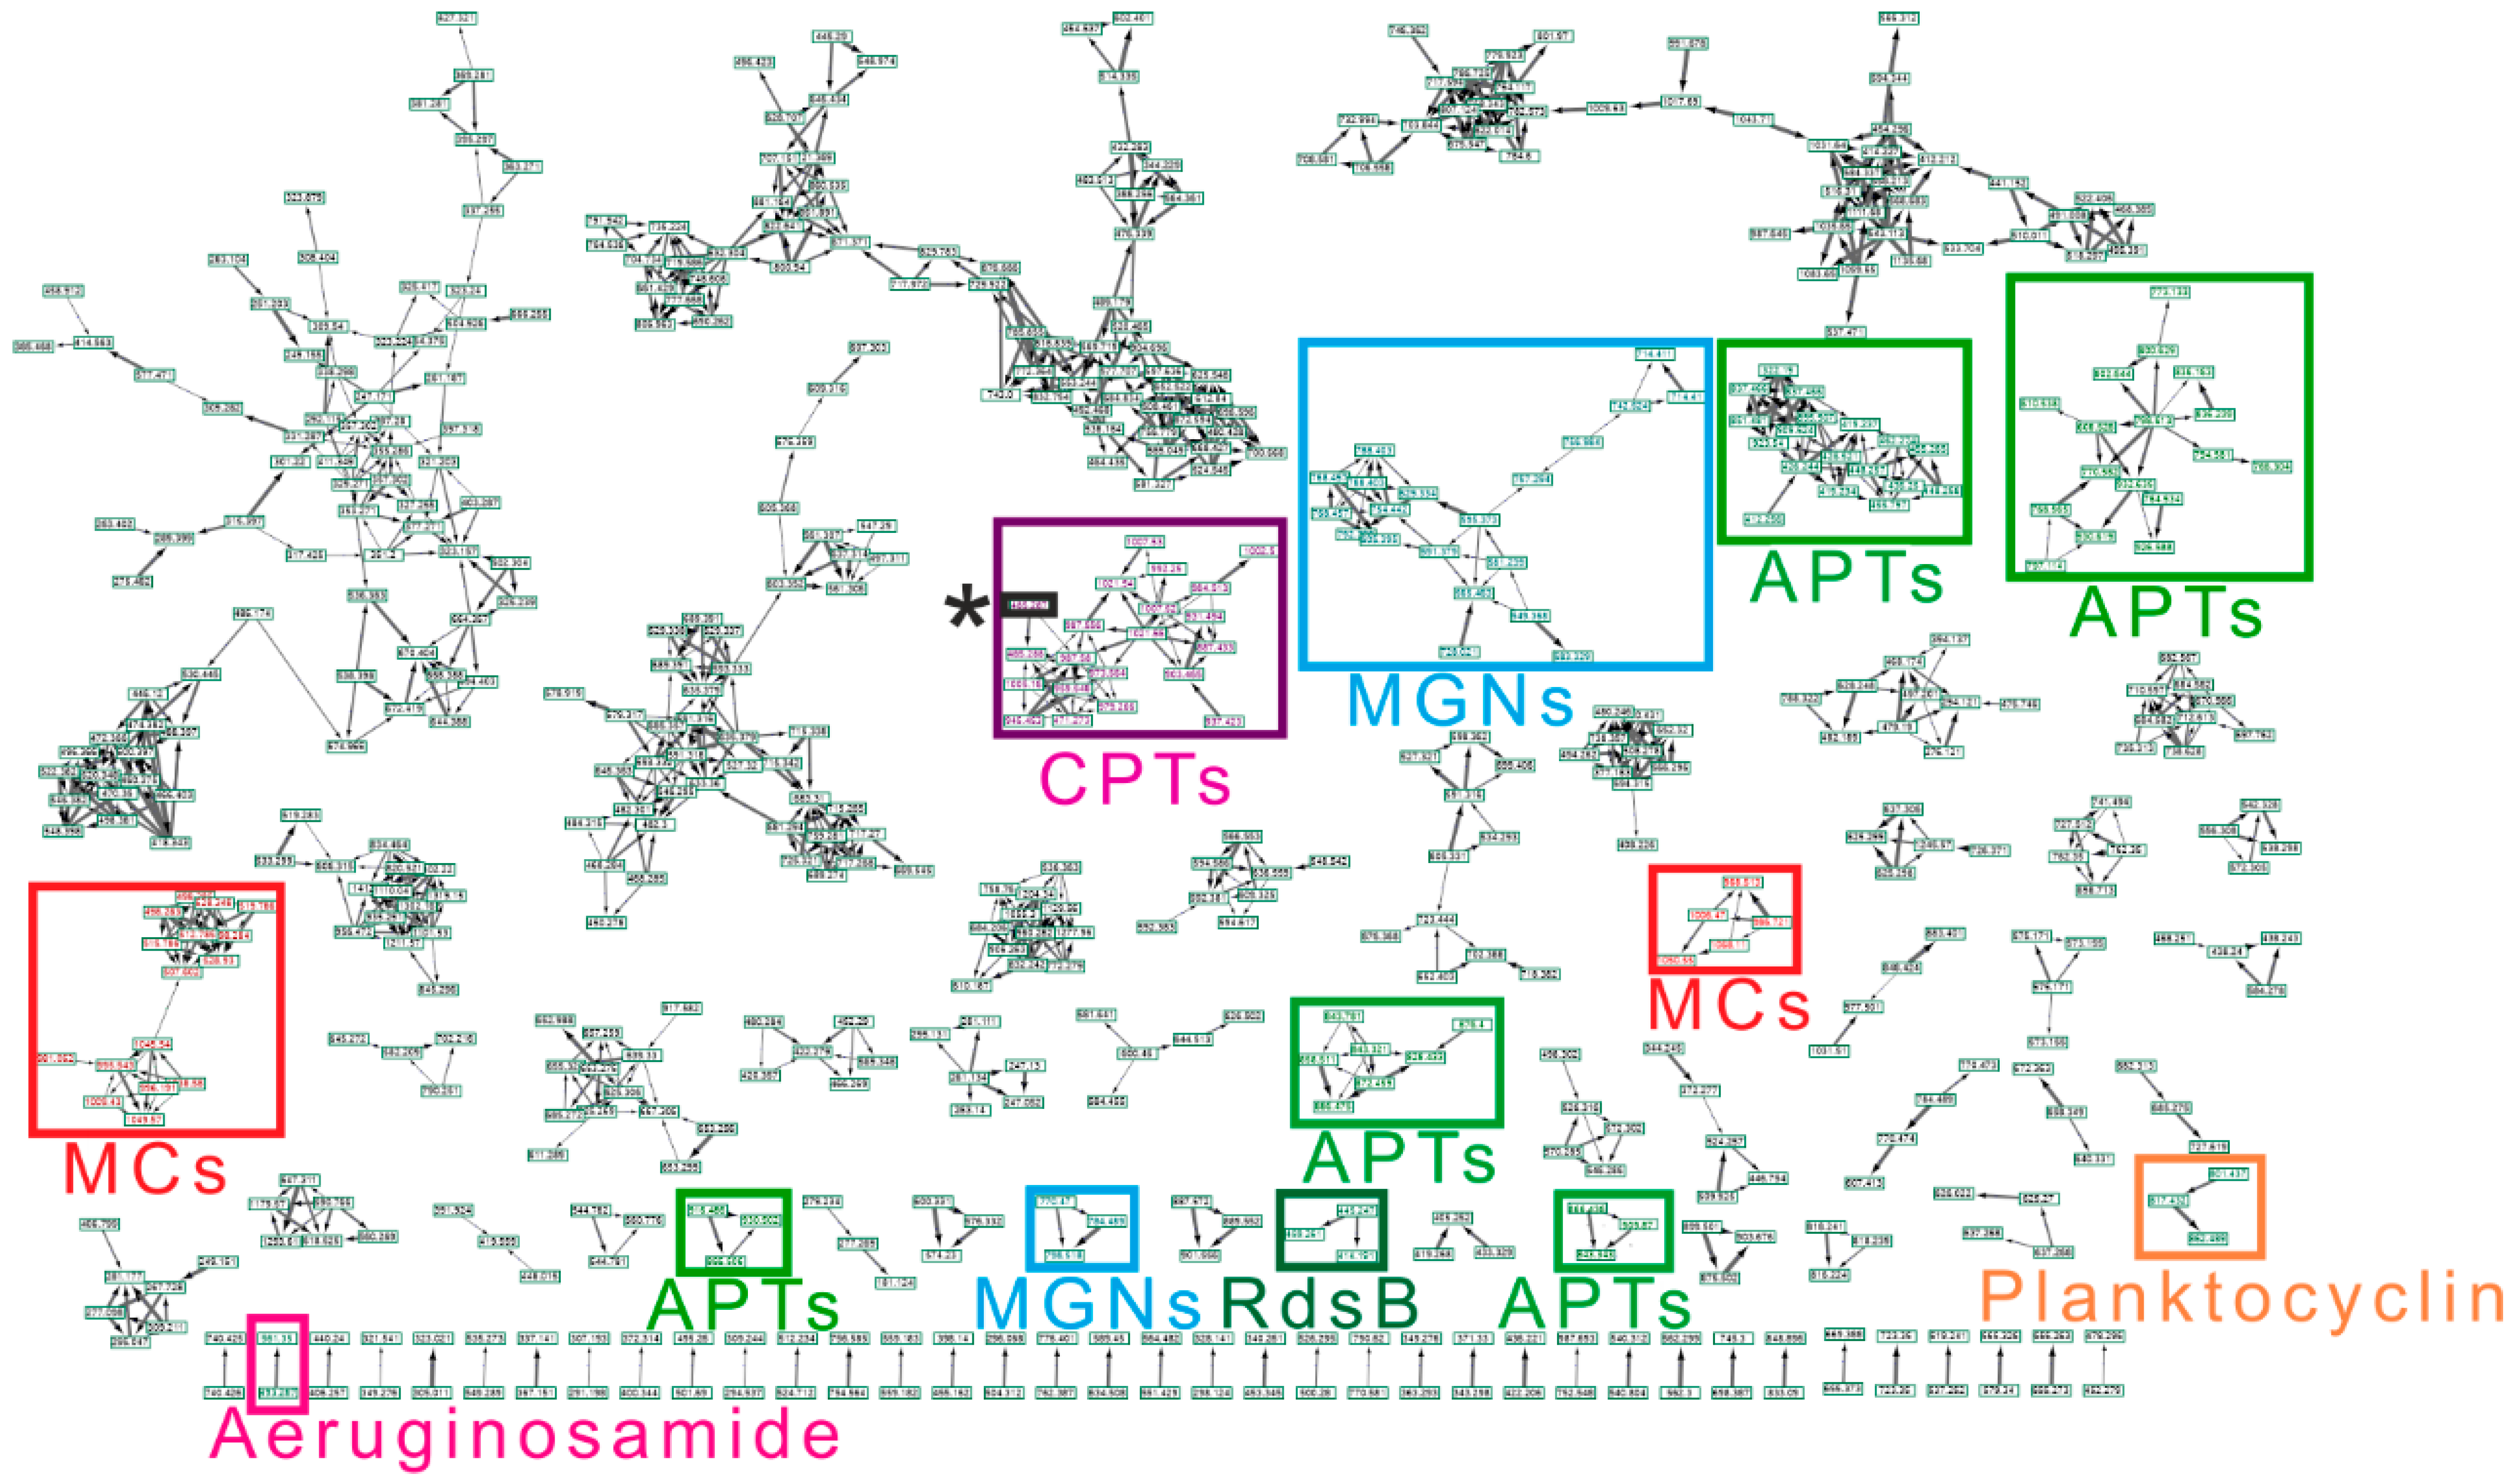 Toxins | Free Full-Text | Insight into Unprecedented Diversity of  Cyanopeptides in Eutrophic Ponds Using an MS/MS Networking Approach | HTML